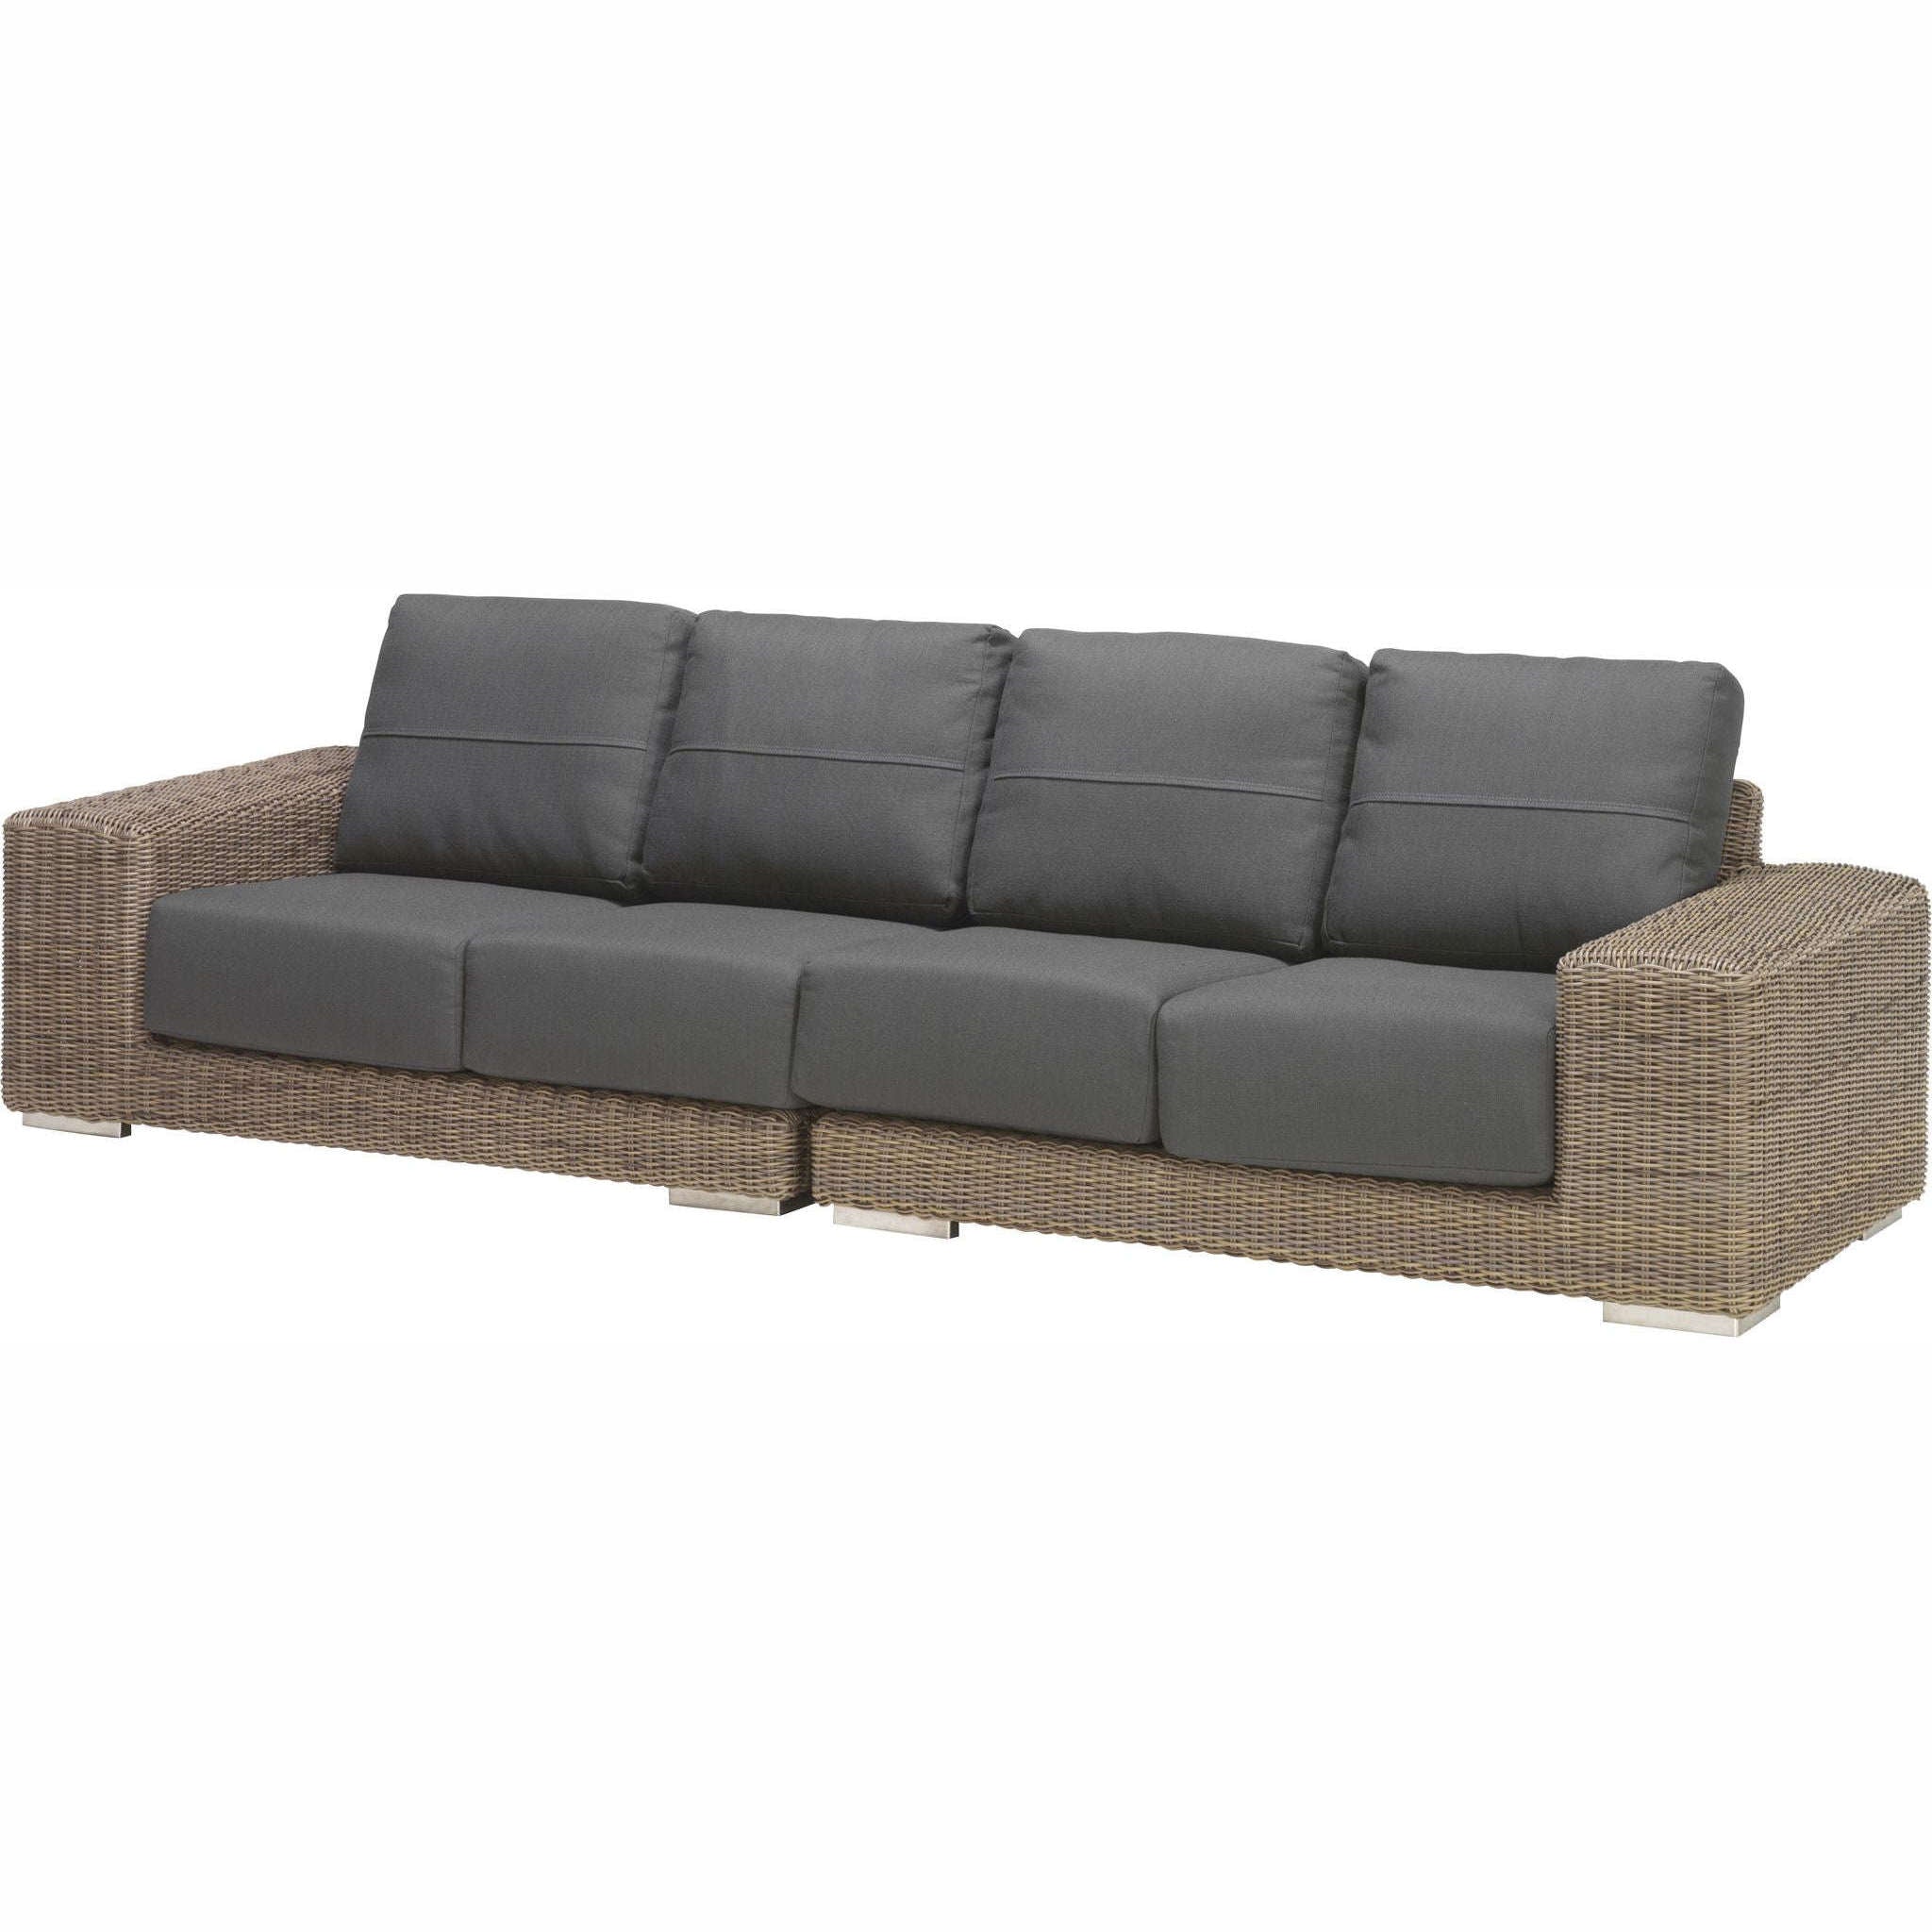 Exceptional Garden:4 Seasons Outdoor Kingston Pure Corner Lounge Set with Coffee Table and Glass Top